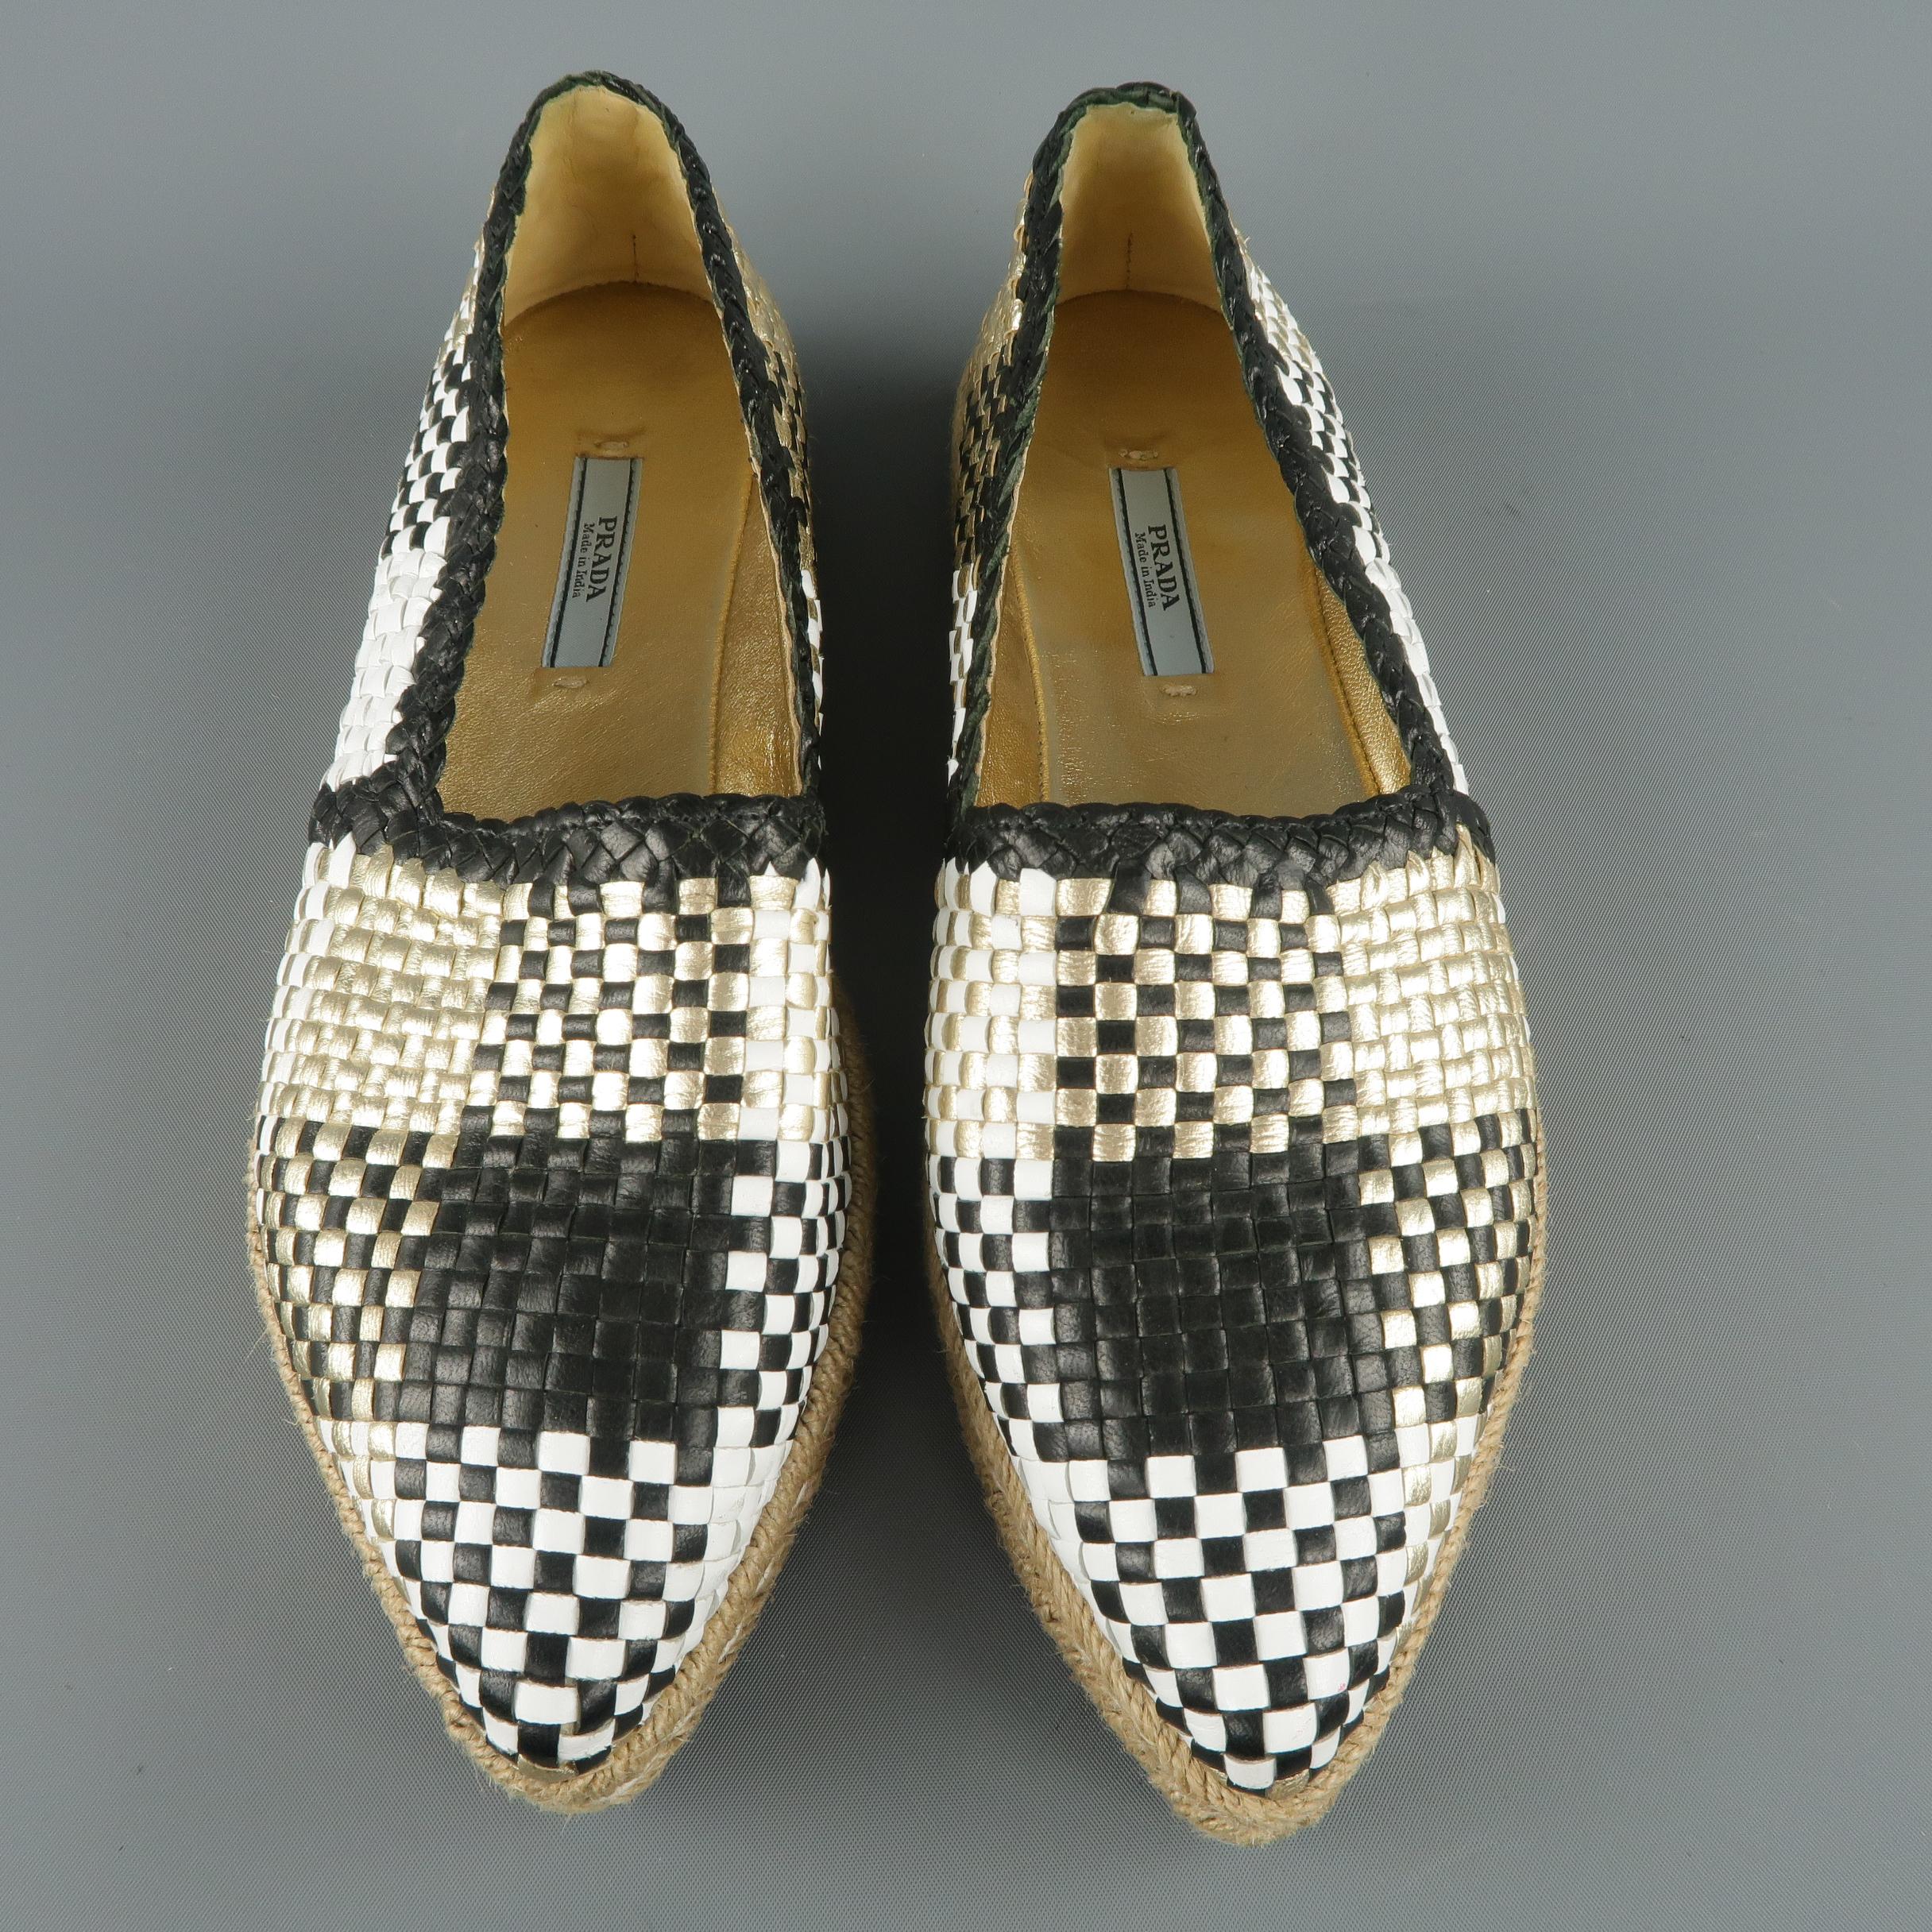 PRADA espadrilles come in black, white, and metallic gold woven leather in a Madras plaid print with a pointed toe and braided rope trim sole.
 
Excellent Pre-Owned Condition.
Marked: IT 37.5
 
Outsole: 10.5 x 3.25 in.